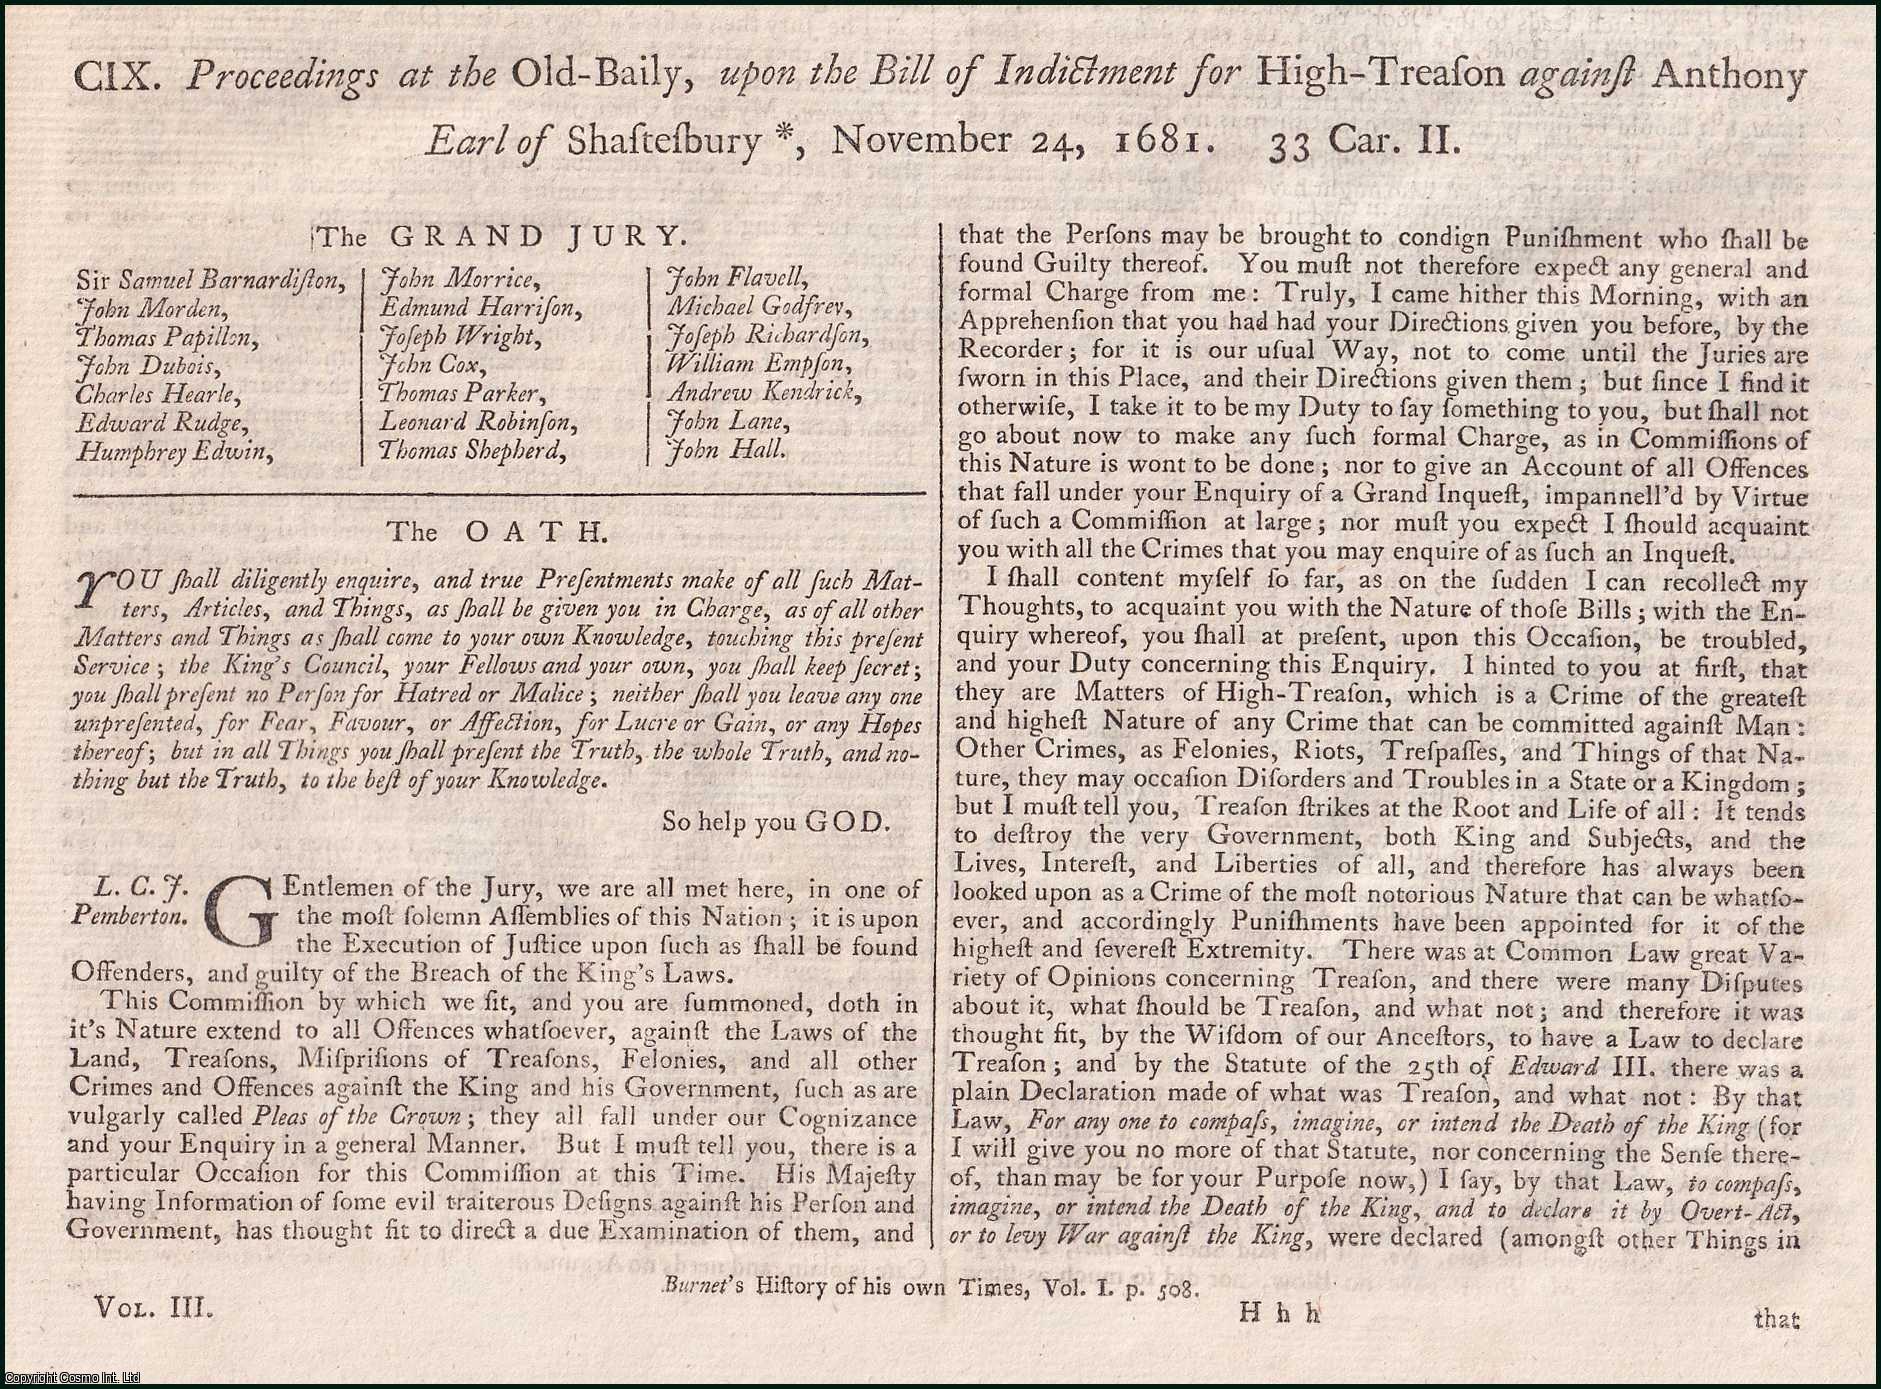 [Trial]. - Proceedings at the Old-Baily, upon the Bill of Indictment for High-Treason against Anthony Earl of Shaftesbury, November 24, 1681. An original report from the Collected State Trials.